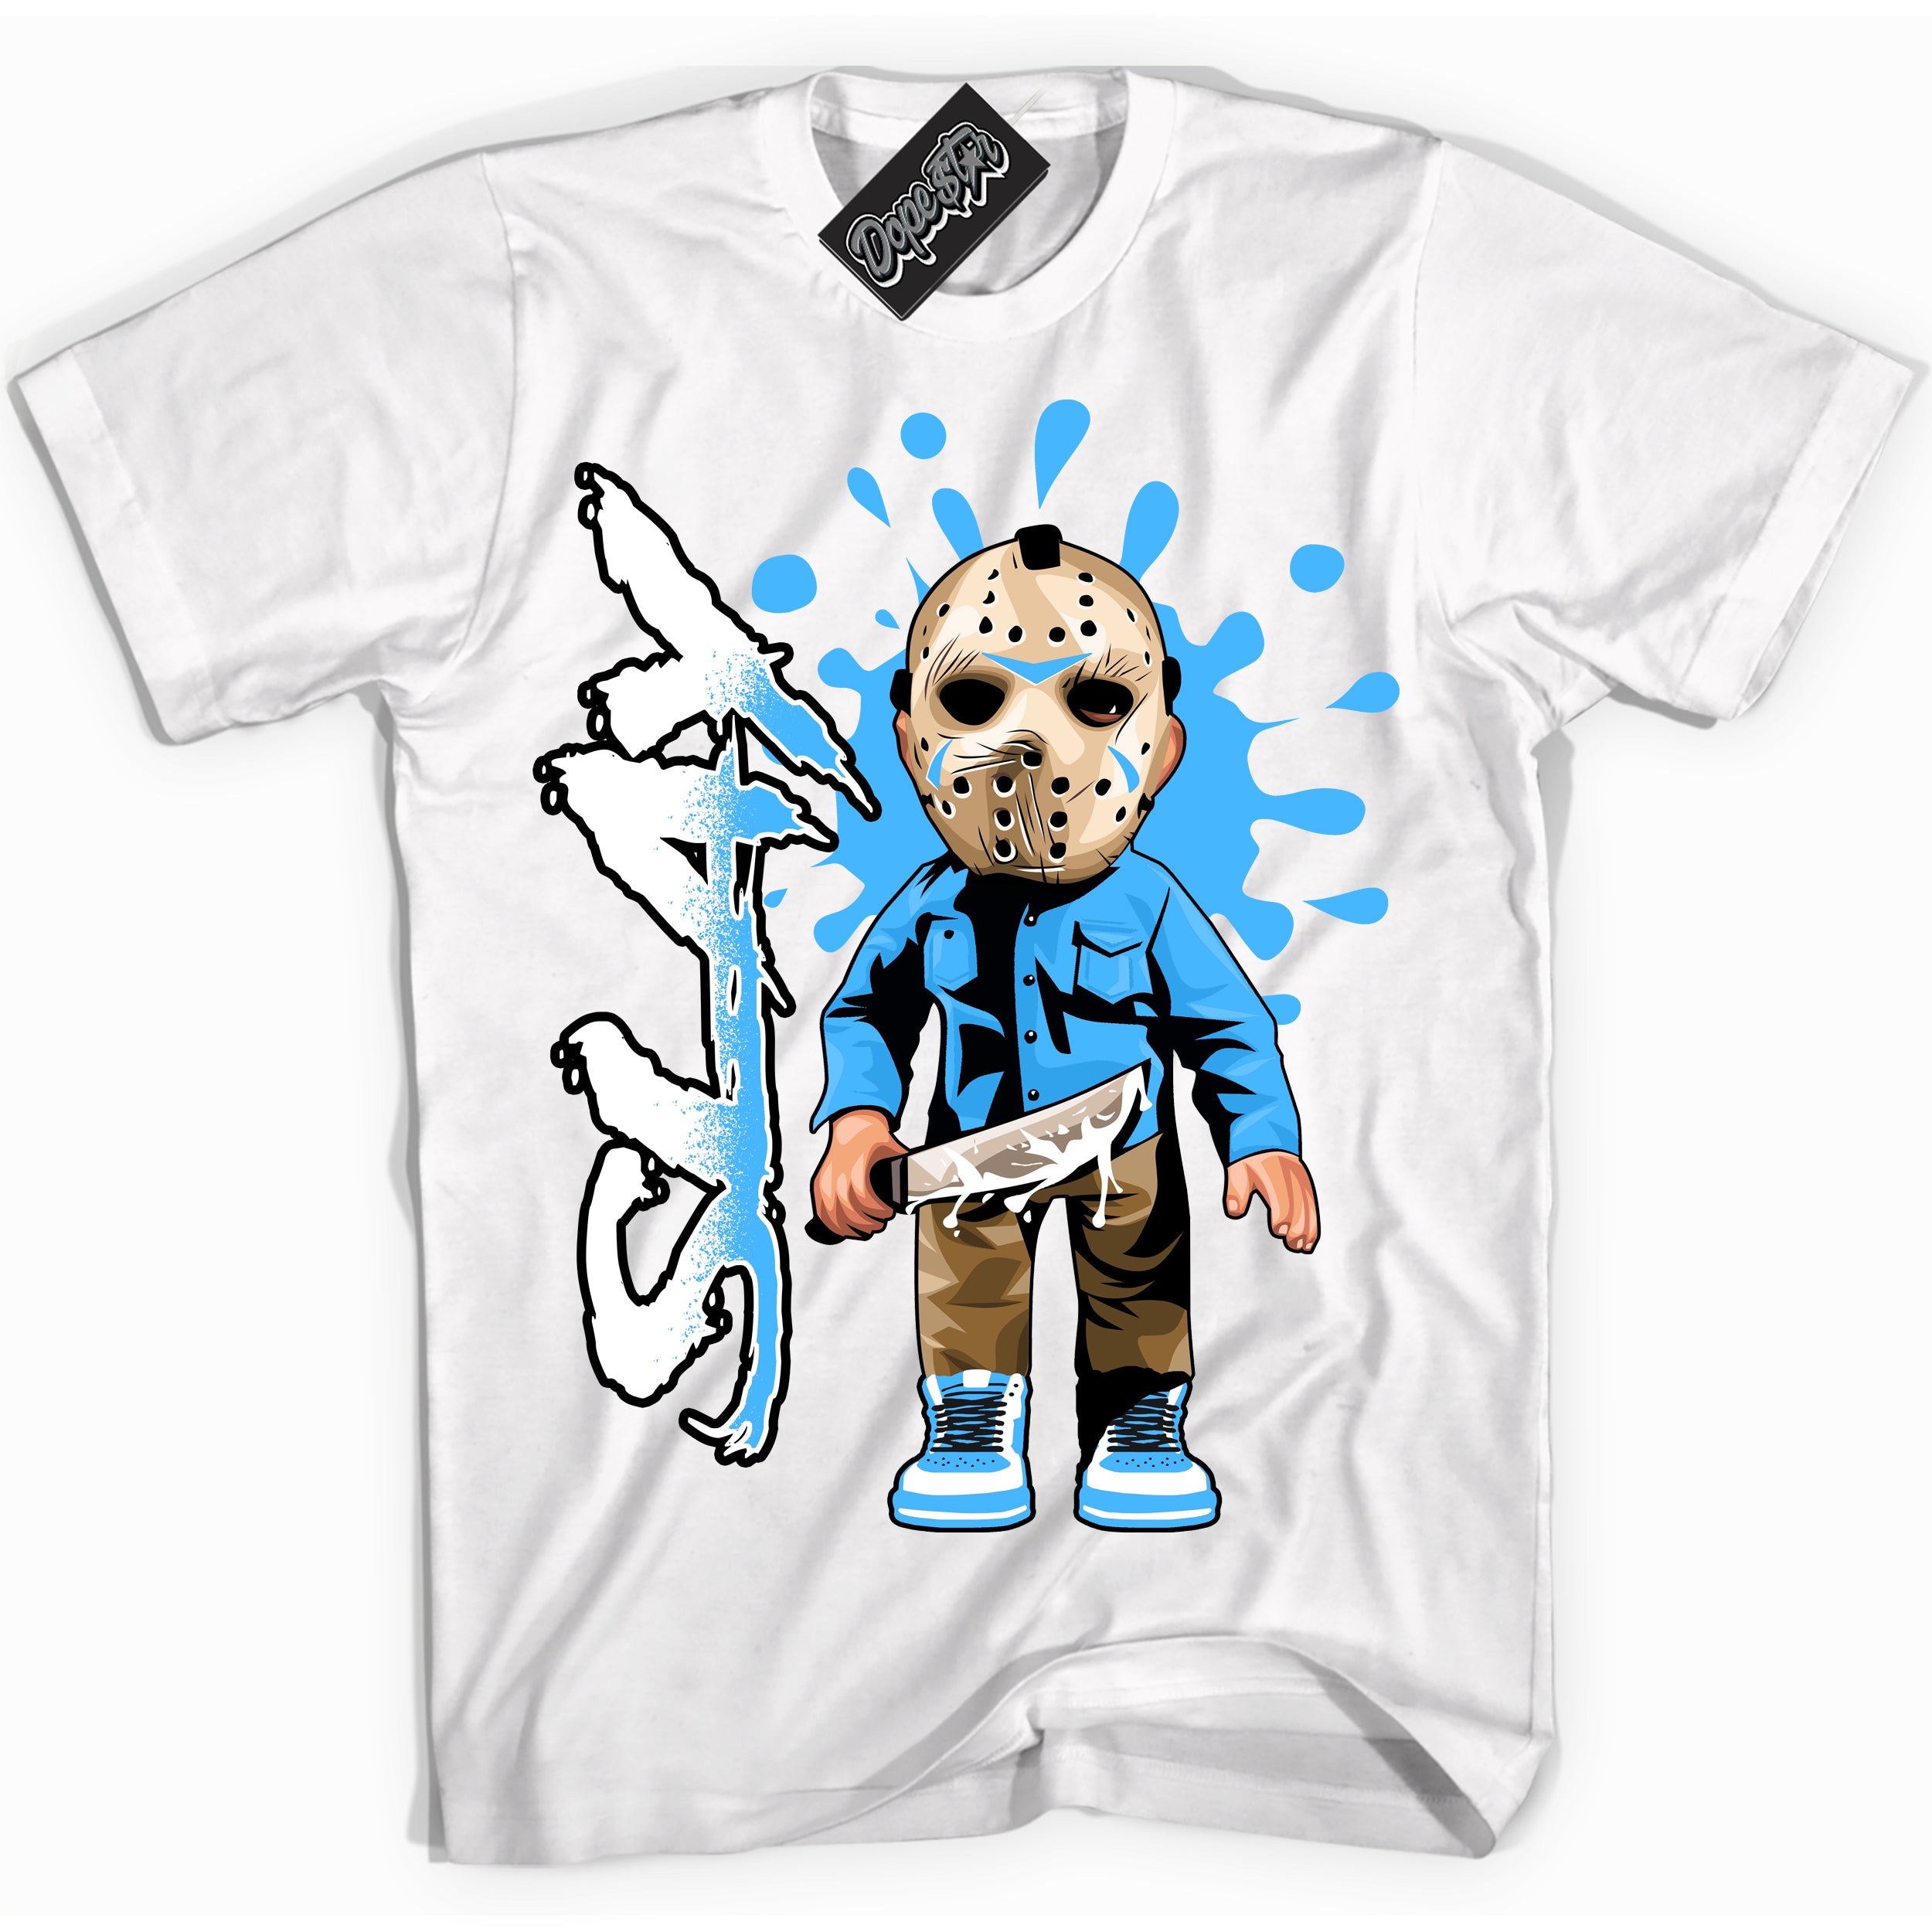 Cool White graphic tee with “ Slay ” design, that perfectly matches Powder Blue 9s sneakers 